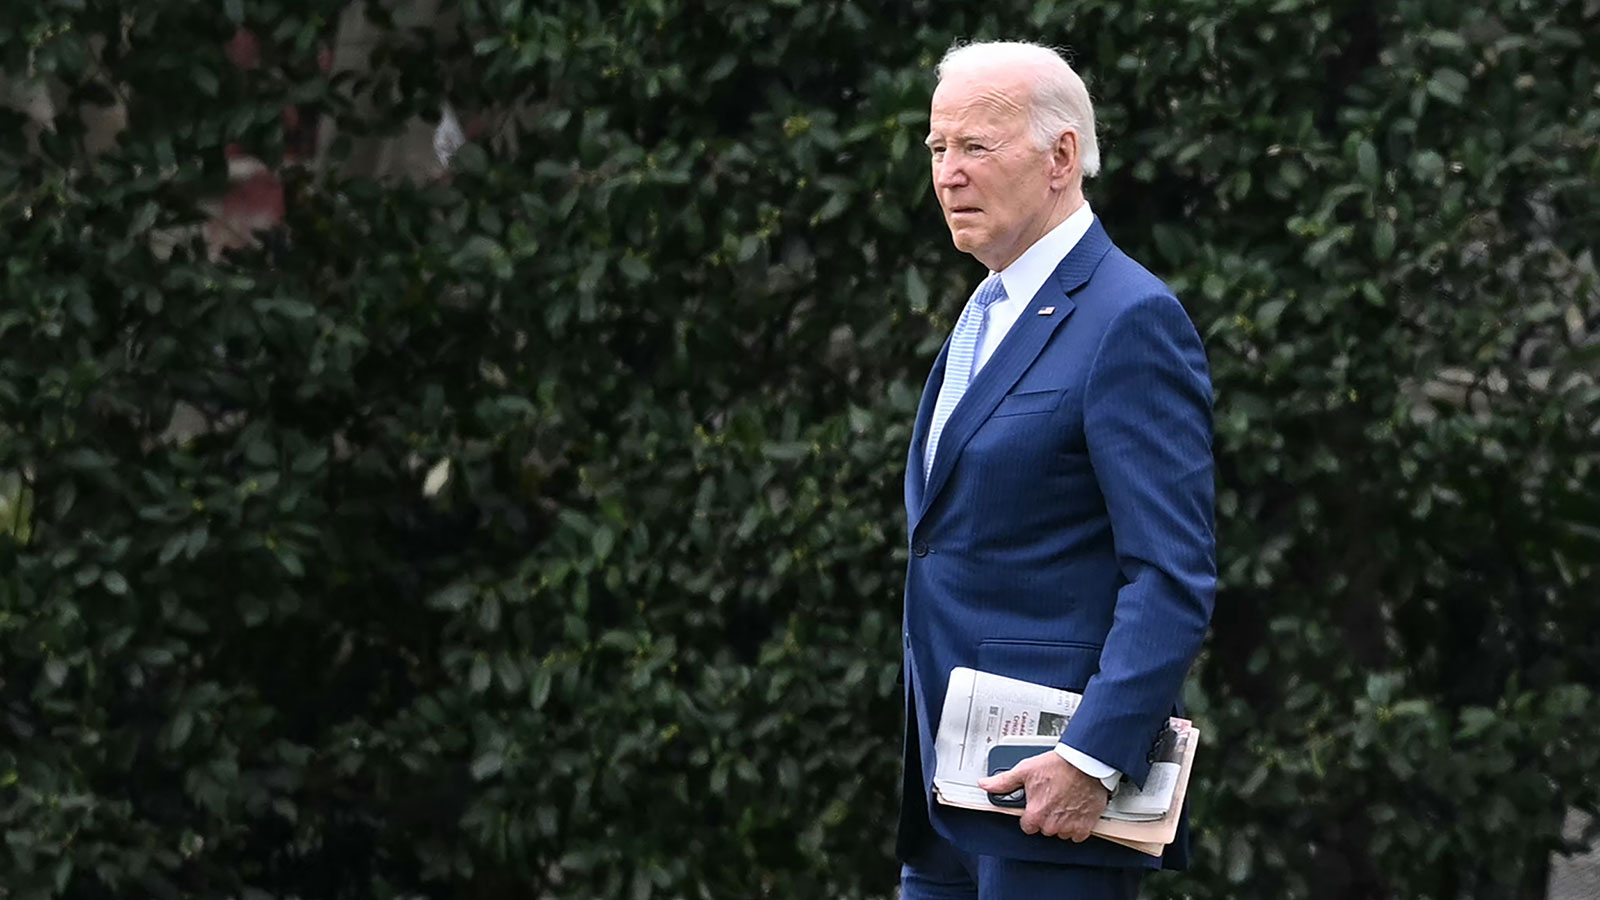 US President Joe Biden makes his way to board Marine One before departing from the South Lawn of the White House in Washington, DC, on Friday, March 22.